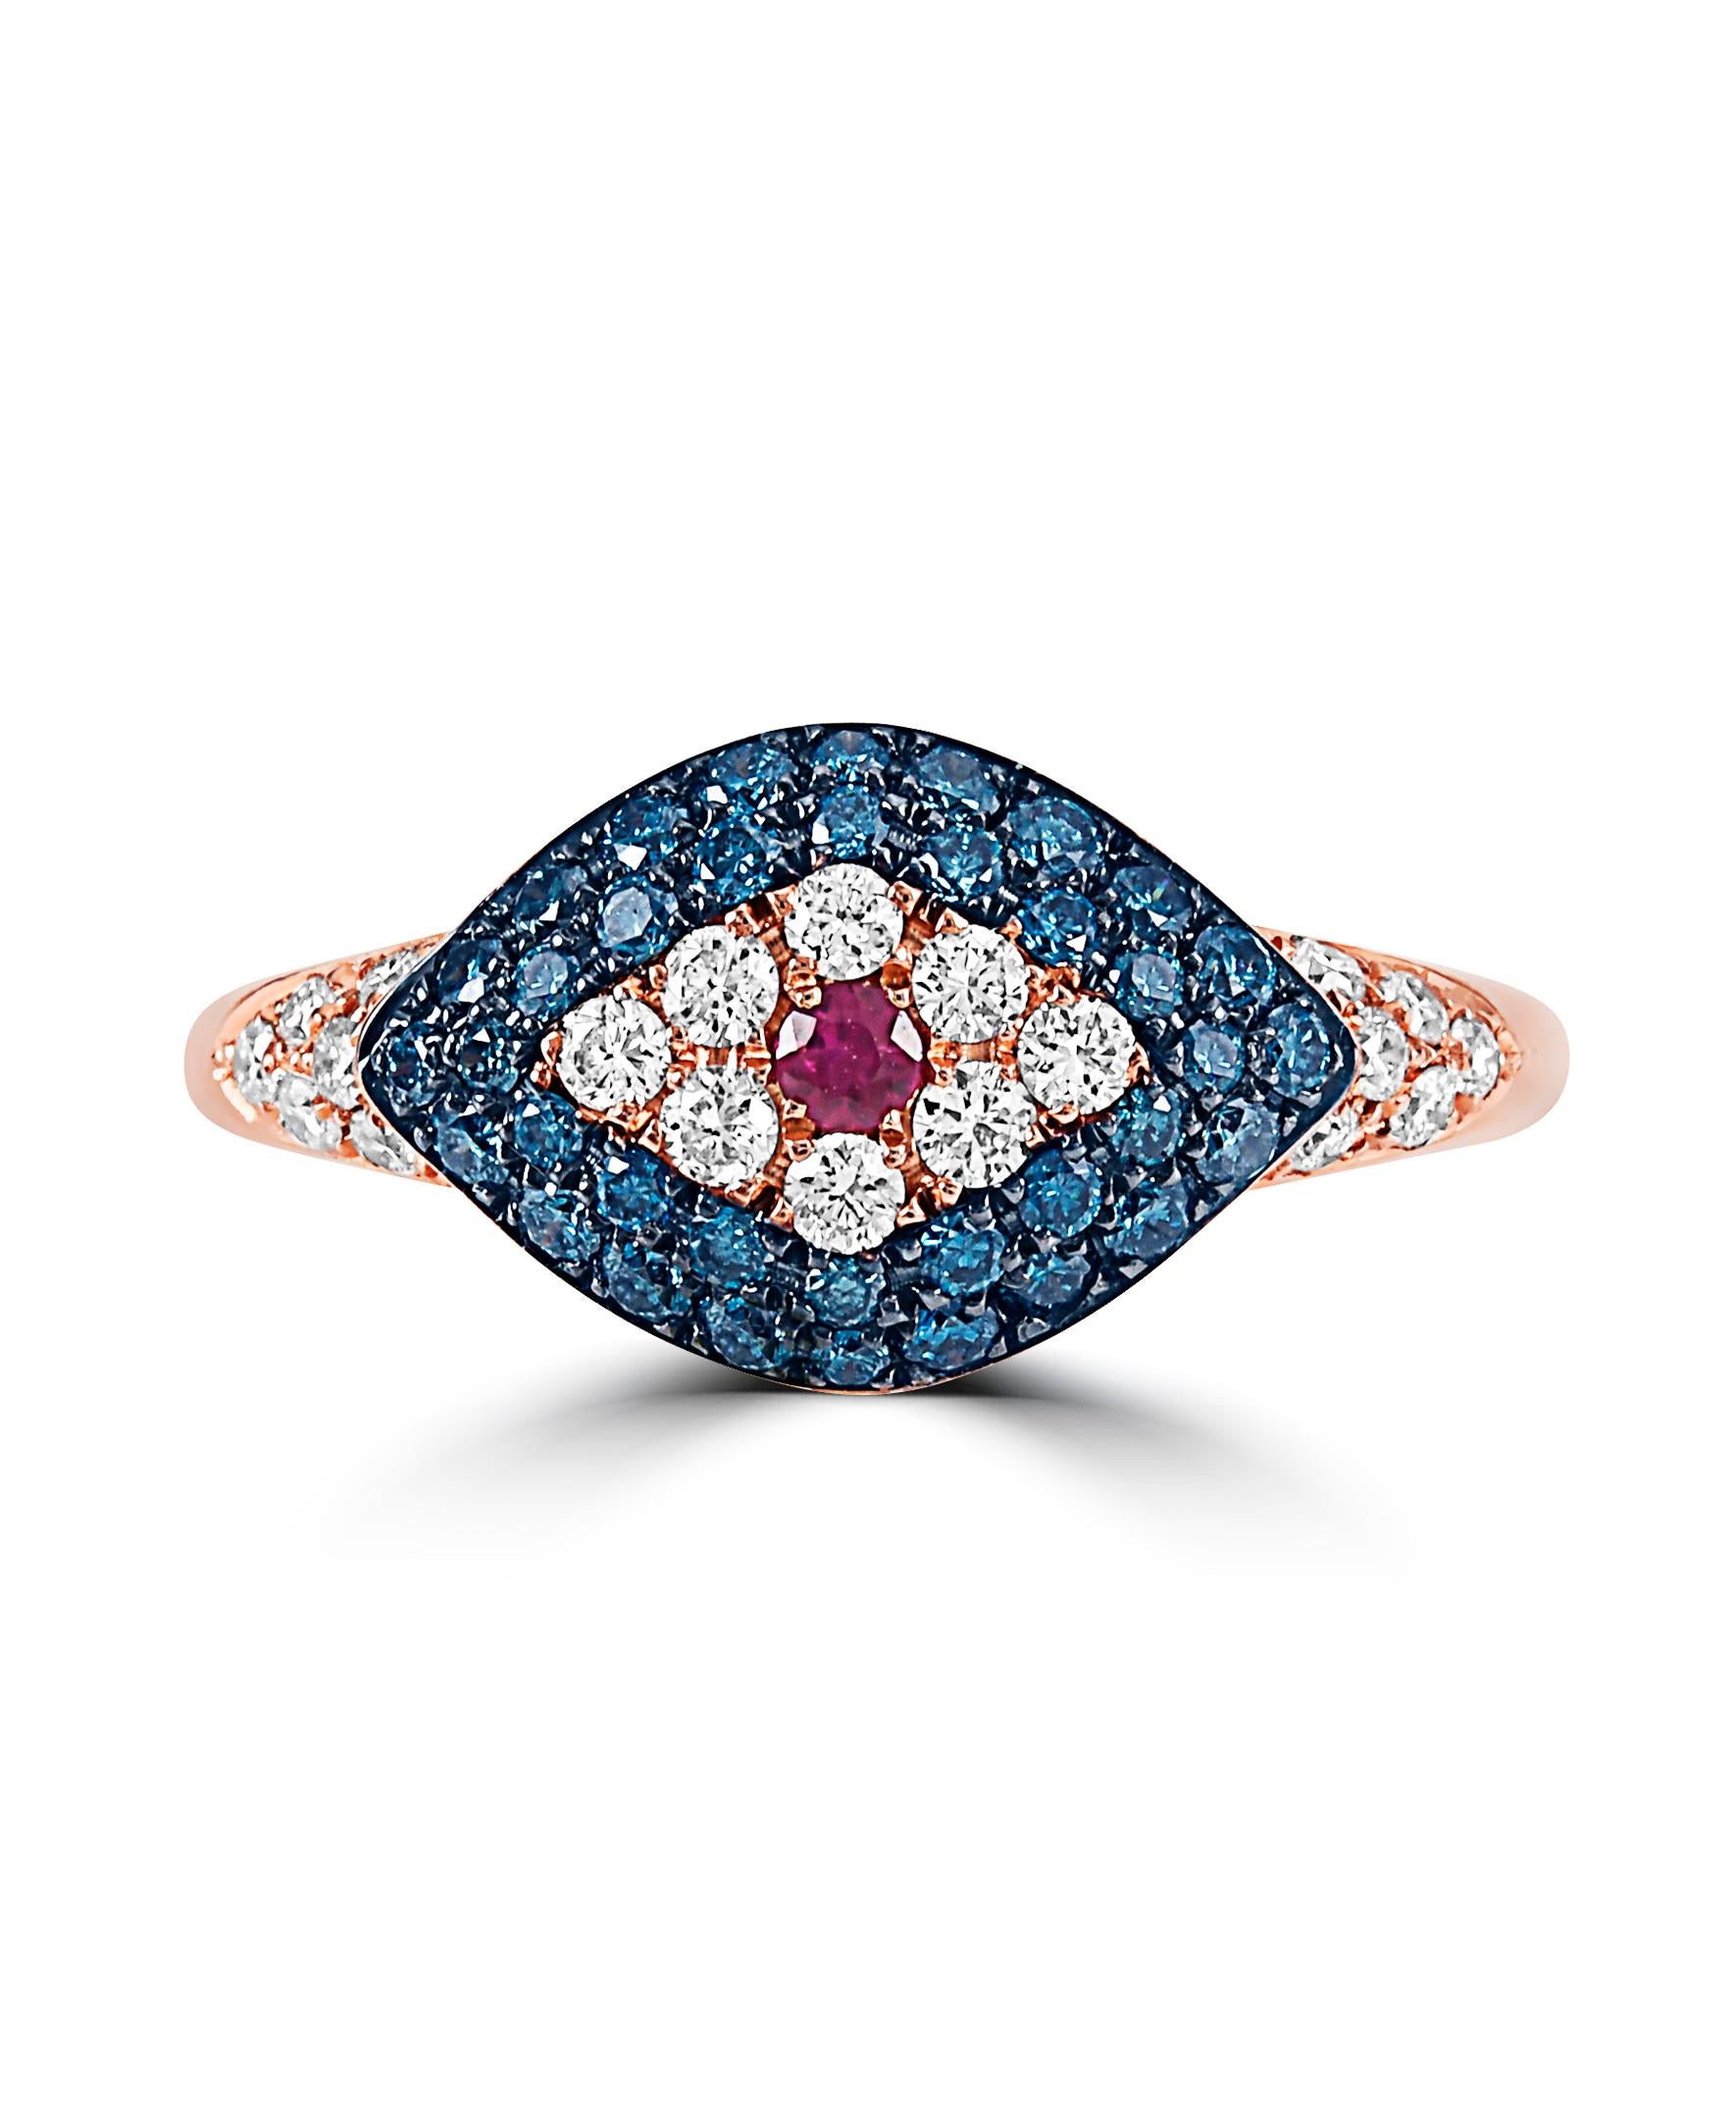 This Effy design is set in 18K Rose gold.
The ring is a modern take of the evil eye style, centered by a ruby eye, with a weight of 0.04ct.
The diamond accents are round in shape, in blue and white colors, with a total weight of 0.56ct.
The ring is